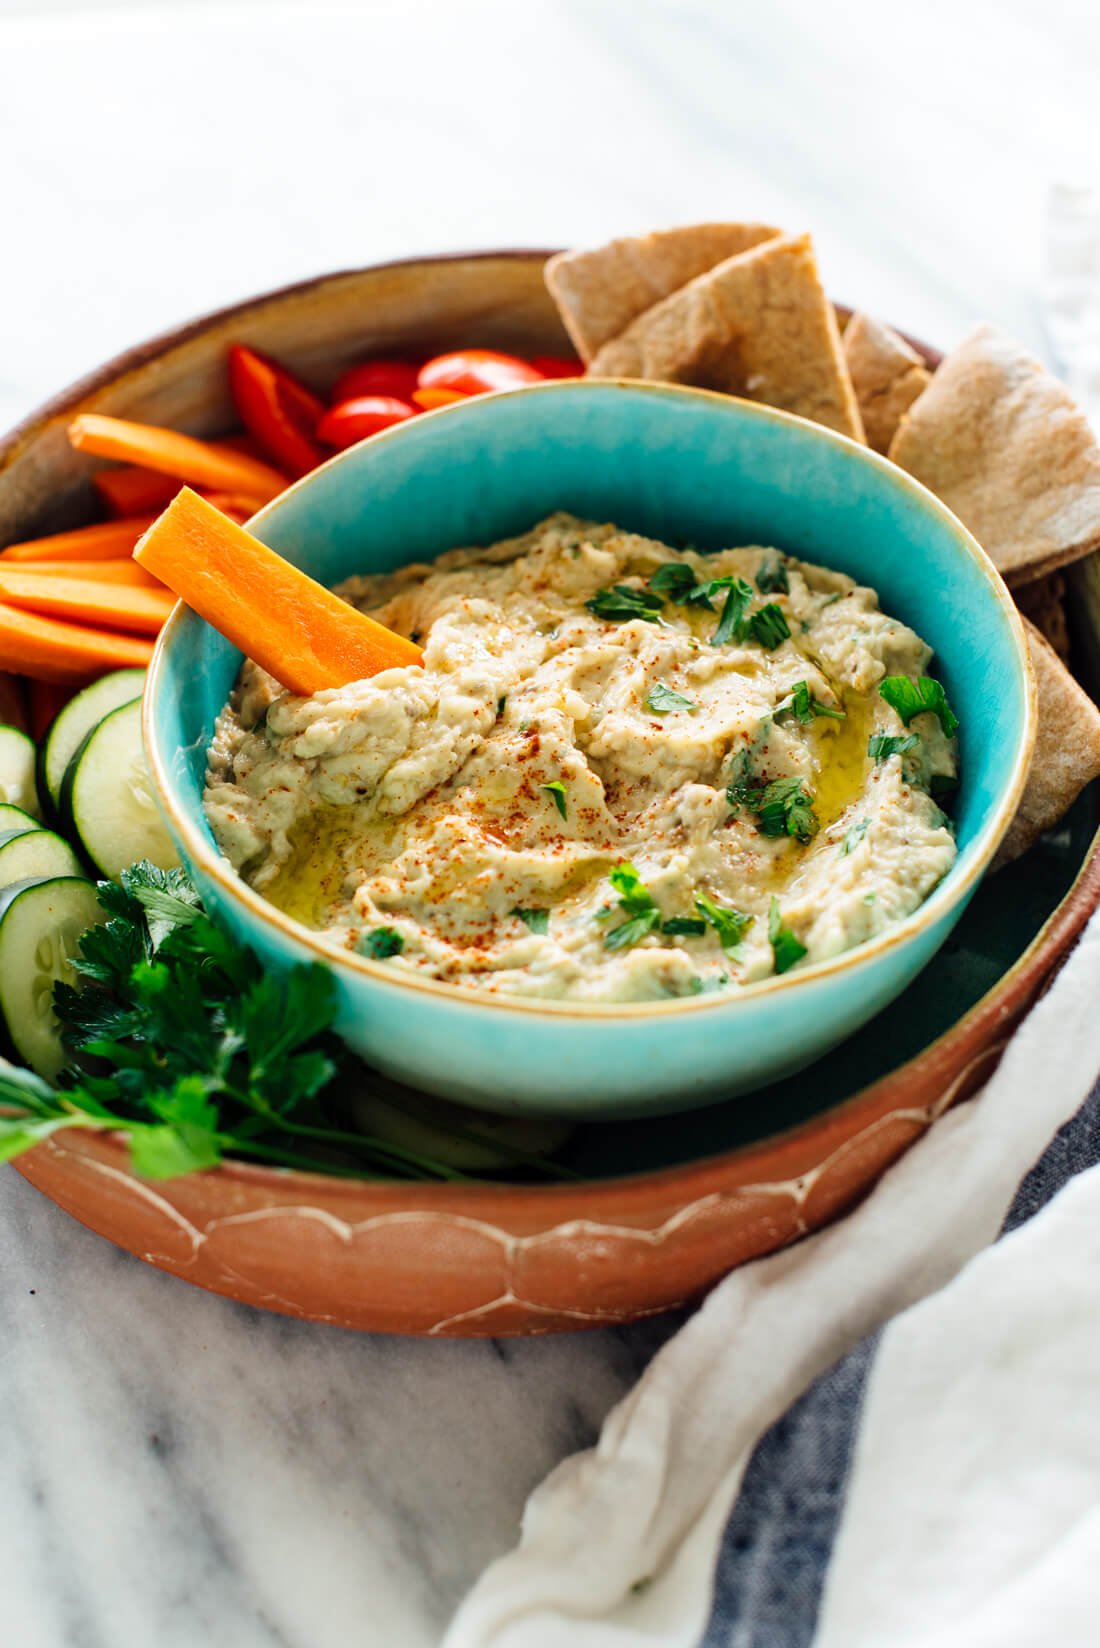 This baba ganoush recipe is the best! It's easy to make, too.